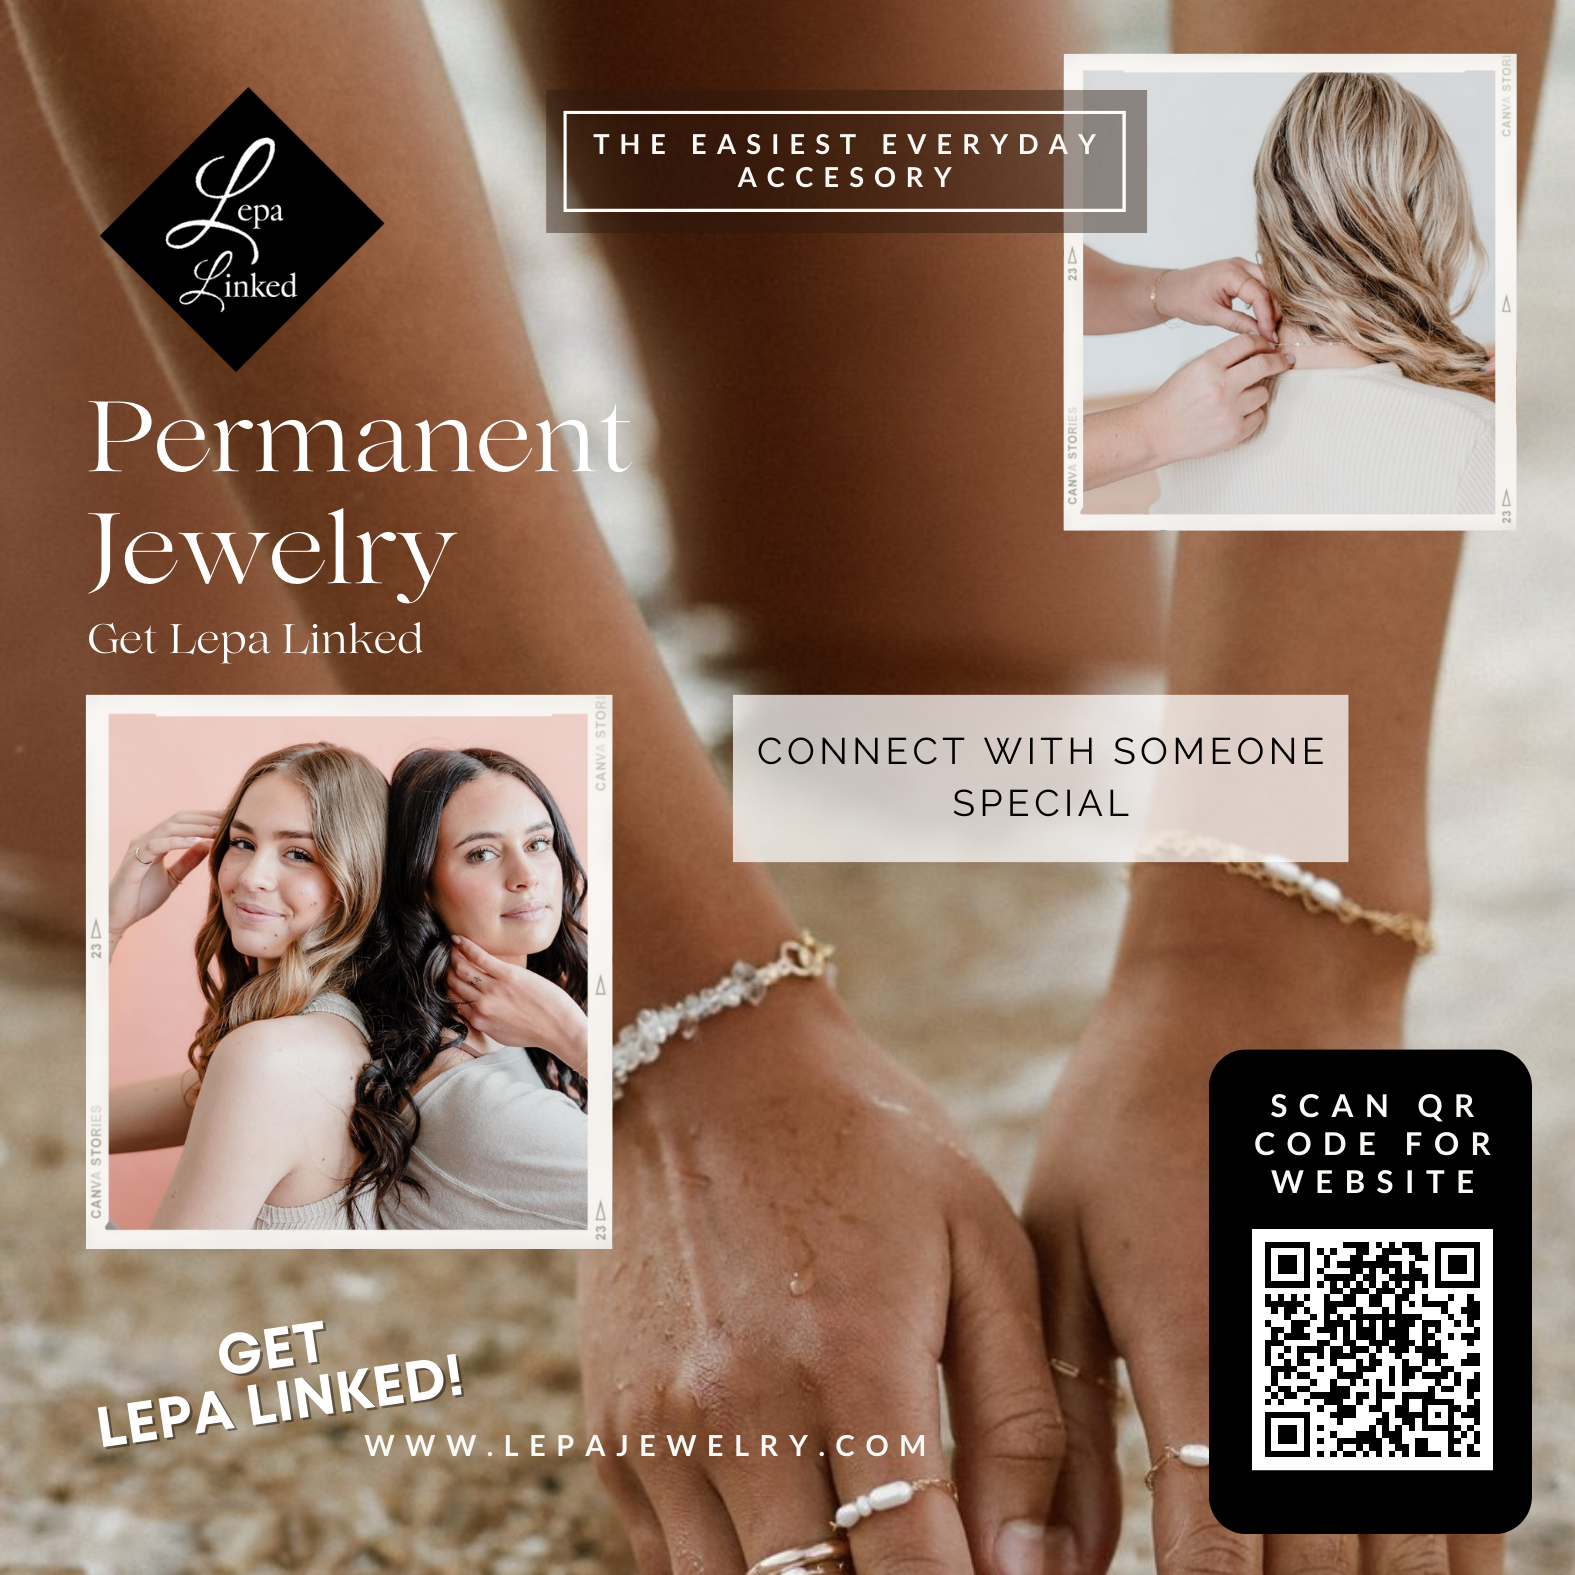 The front cover of a flyer created by Empower Communications in Benton, KY for jewelry store Lepa Linked in downtown paducah, Kentucky for their permanent jewelry business.